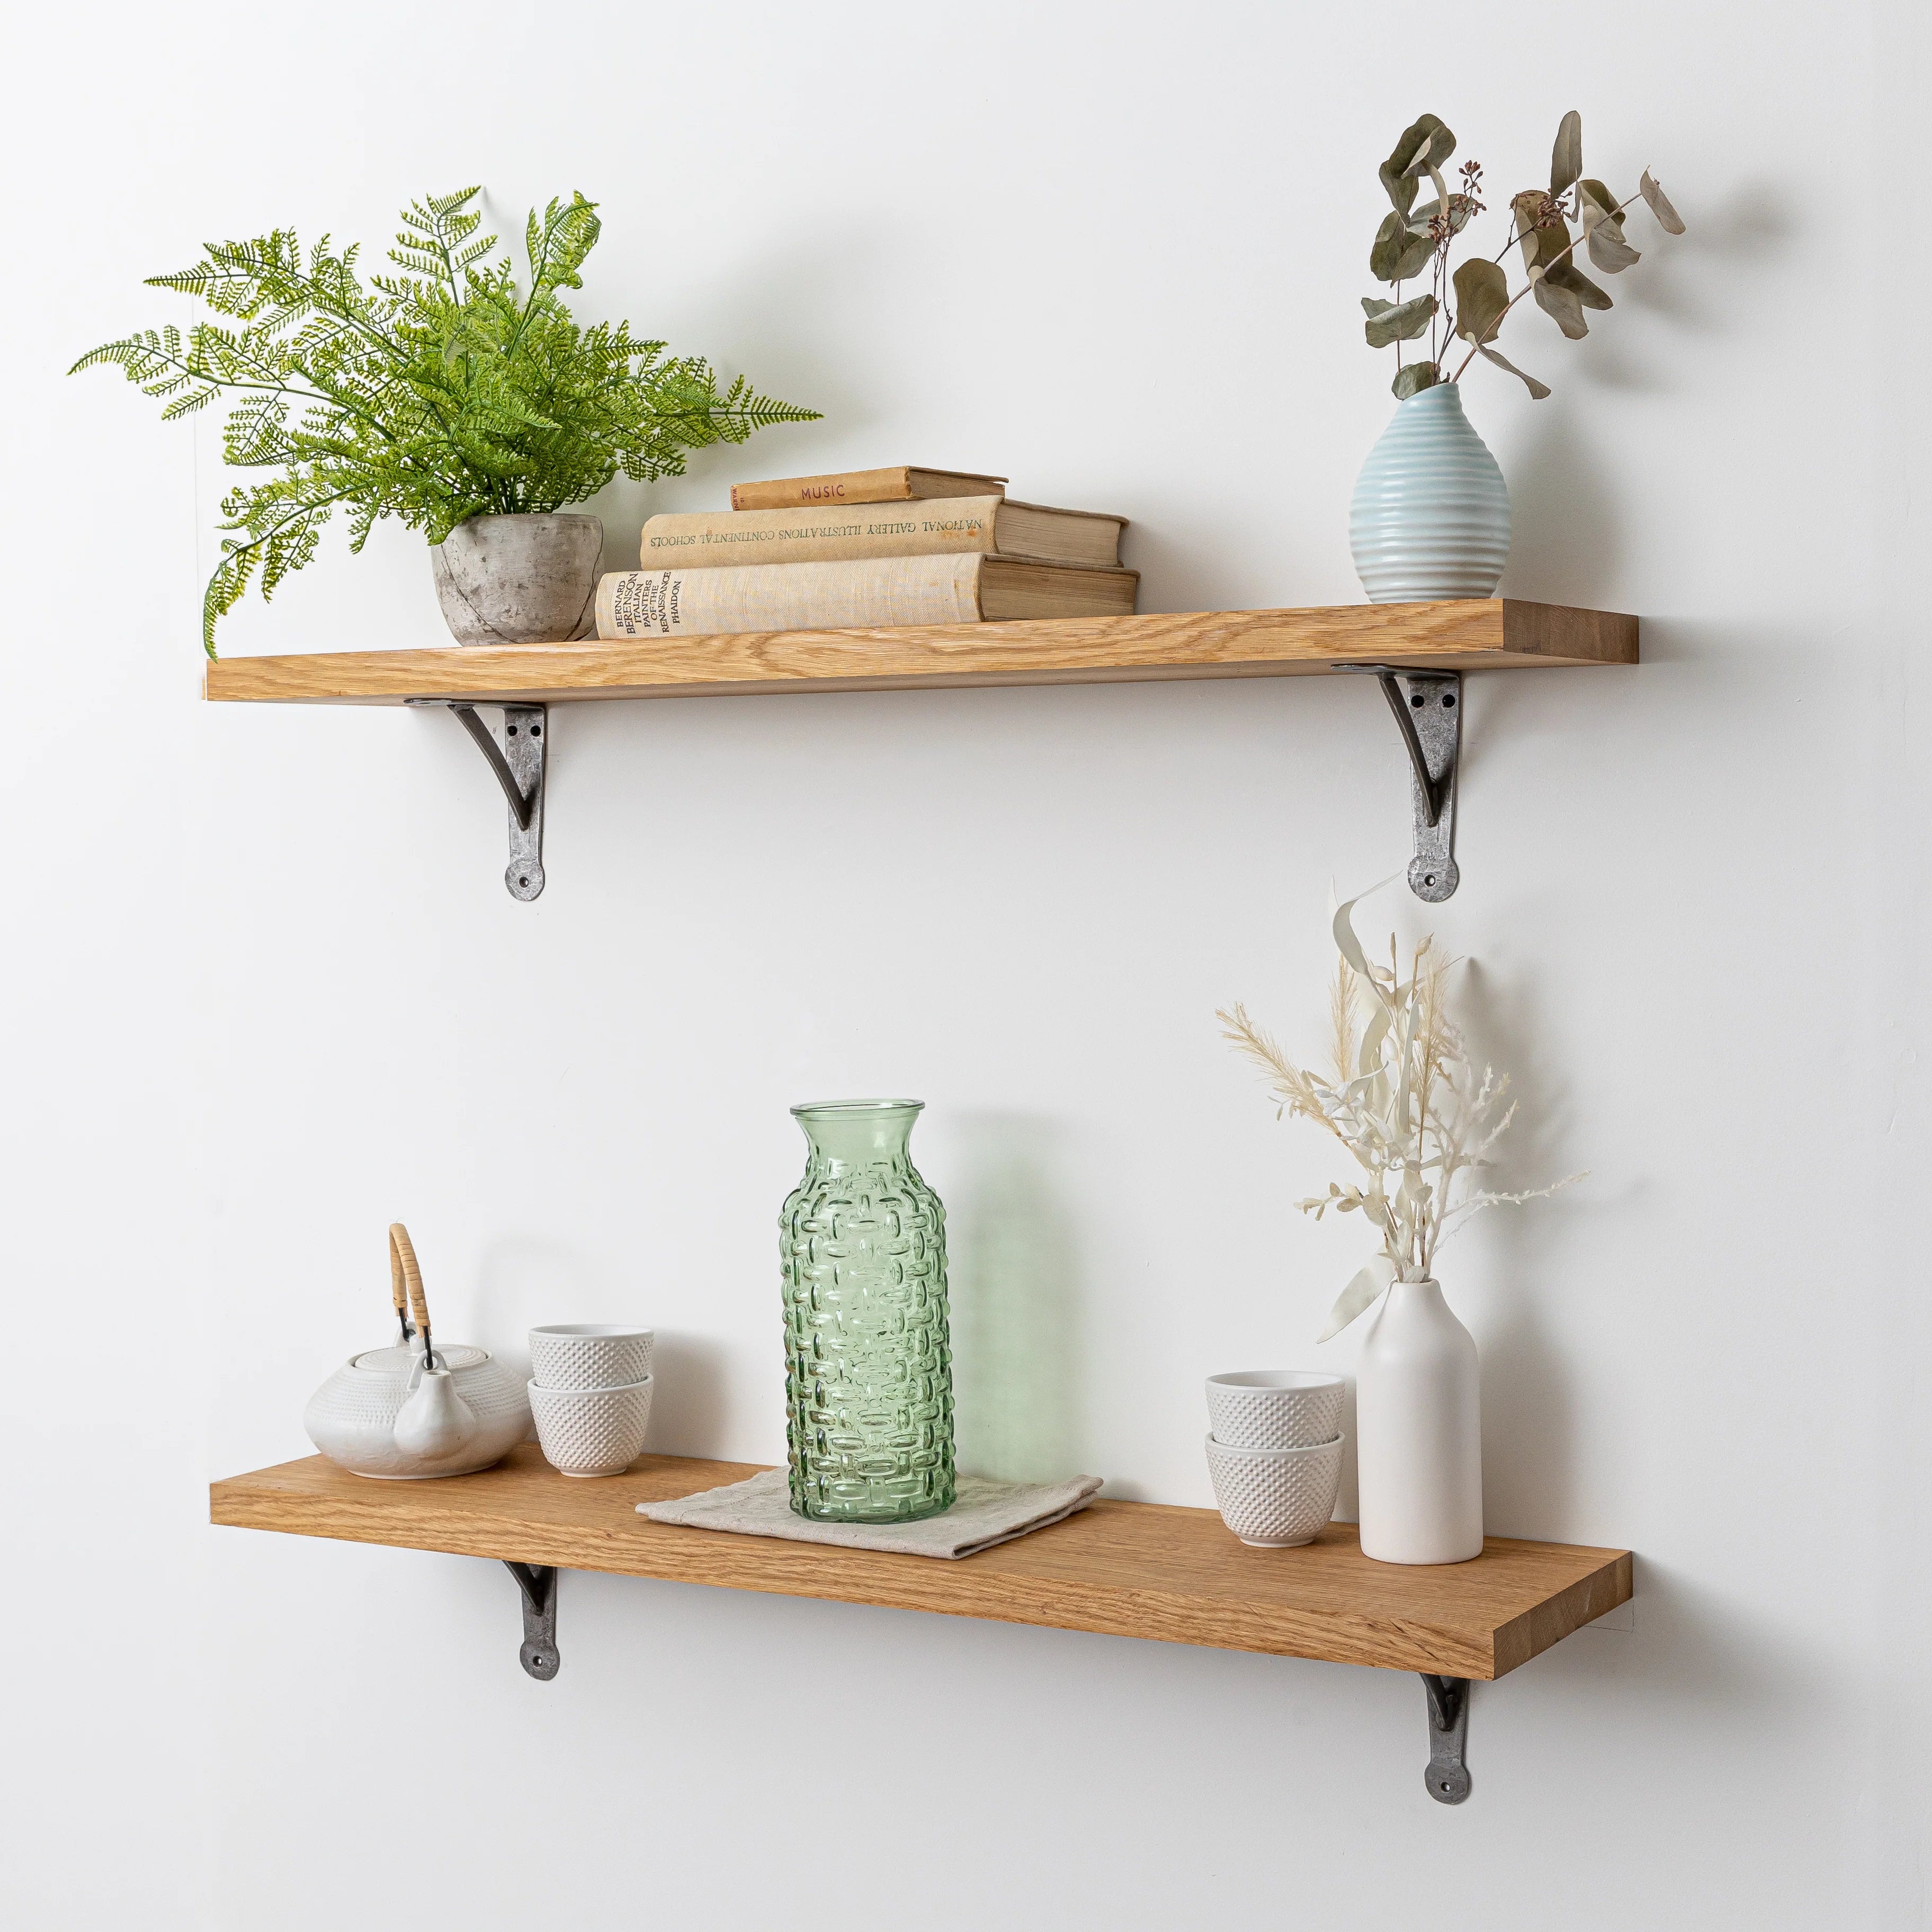 Full Stave Prime Oak Solid Wood Shelf - 27mm thick with Antique Iron Hand-Forged Gallows Shelf Brackets